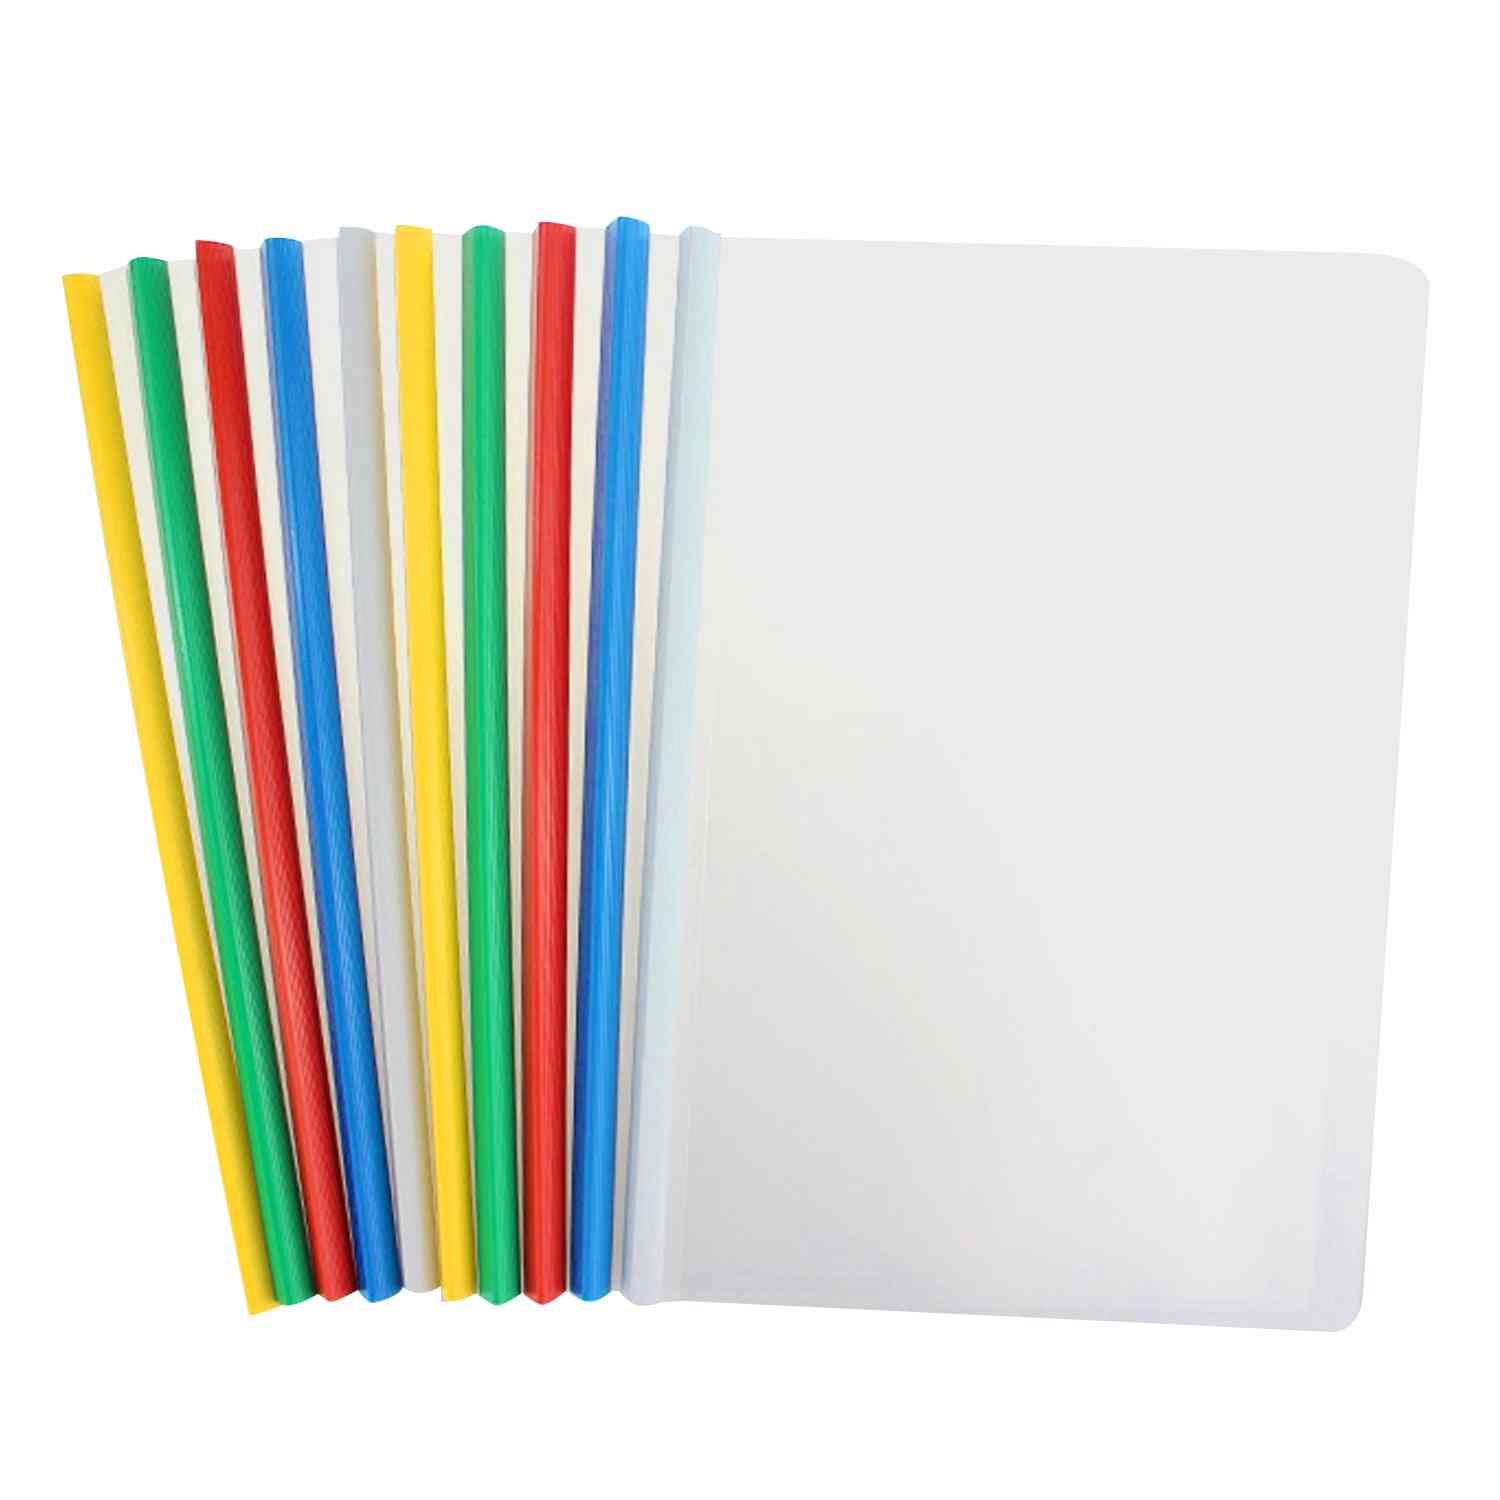 A4 Clear Plastic File Folder With Sliding Bar-report Covers For Display